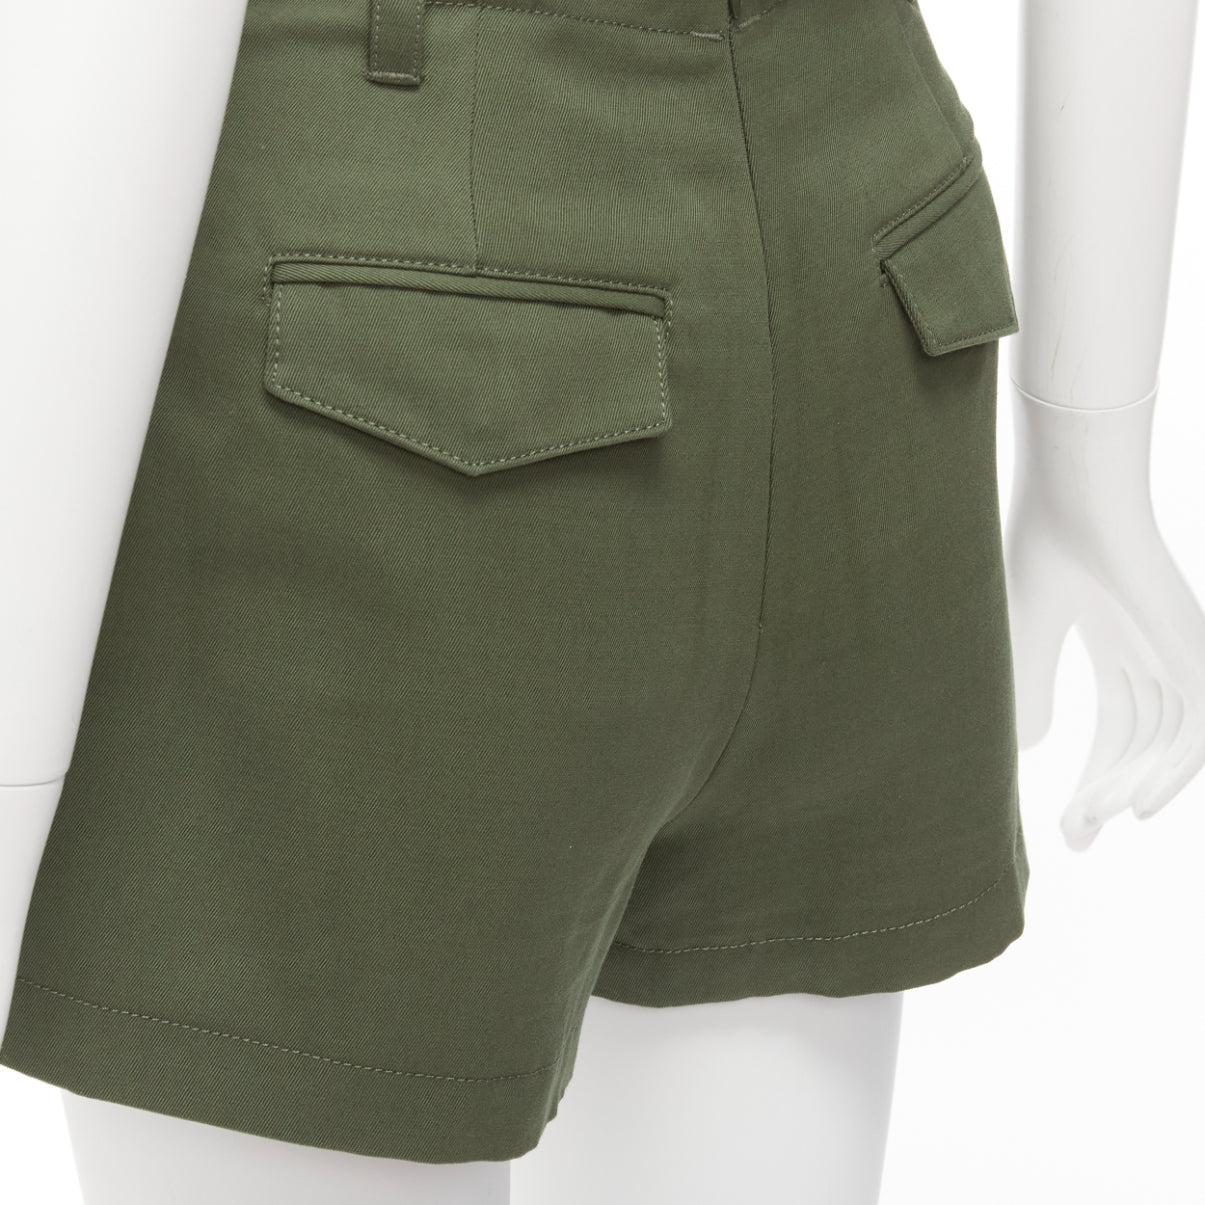 RED VALENTINO 2020 khaki cotton virgin wool high waisted cargp shorts IT36 XXS
Reference: AAWC/A00866
Brand: Red Valentino
Collection: 2020
Material: Cotton, Virgin Wool
Color: Khaki
Pattern: Solid
Closure: Zip
Lining: Green Fabric
Extra Details: